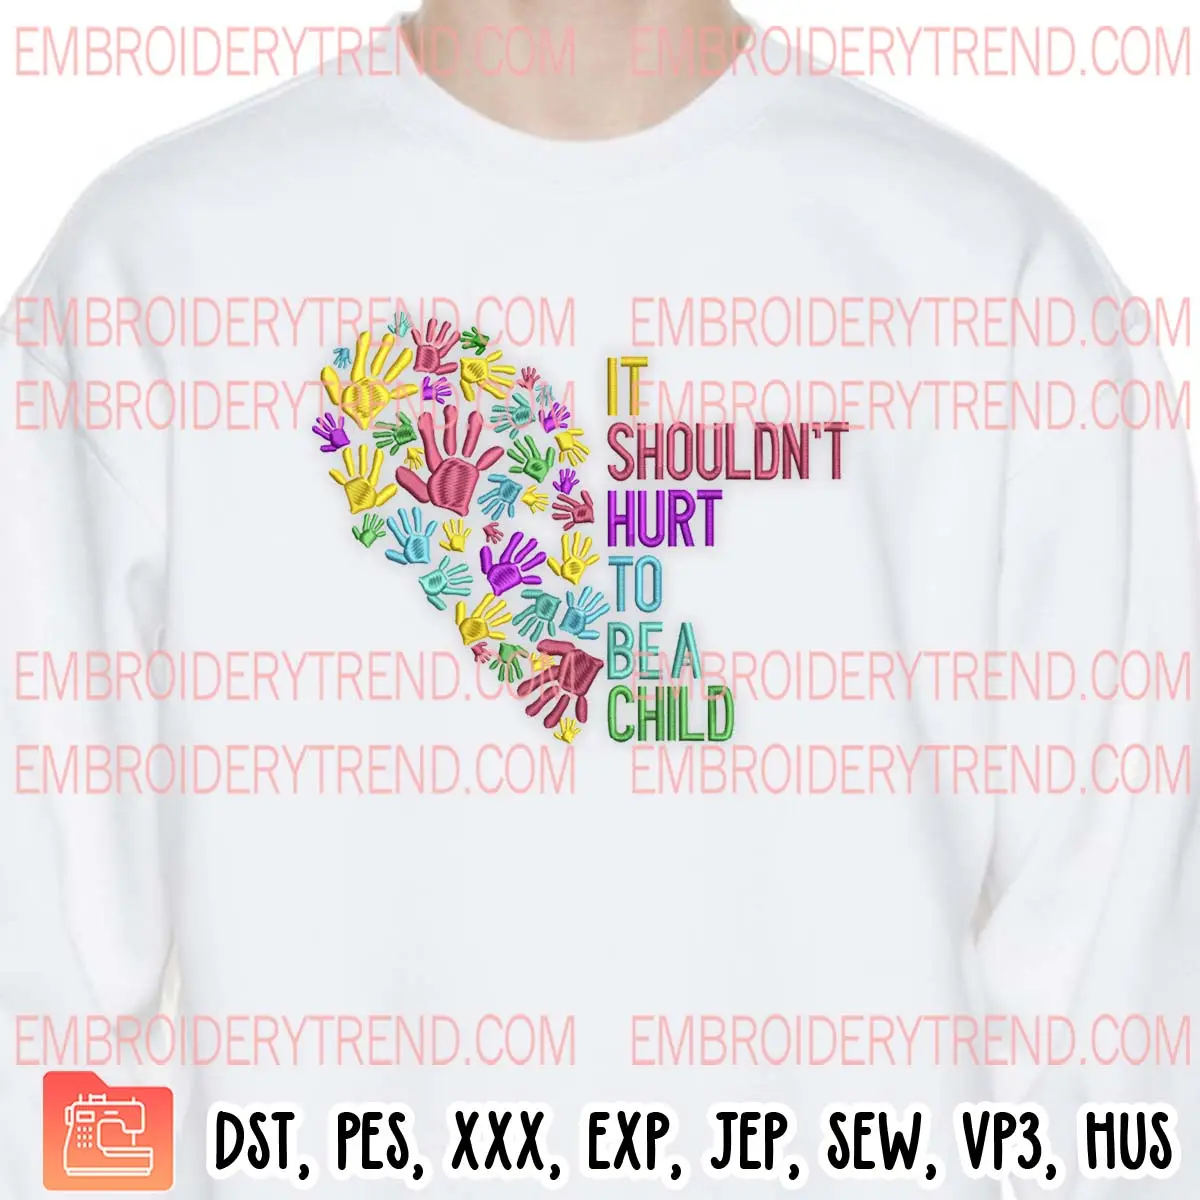 It Shouldn't Hurt To Be A Child Heart Embroidery Design, Child Abuse Embroidery Digitizing Pes File